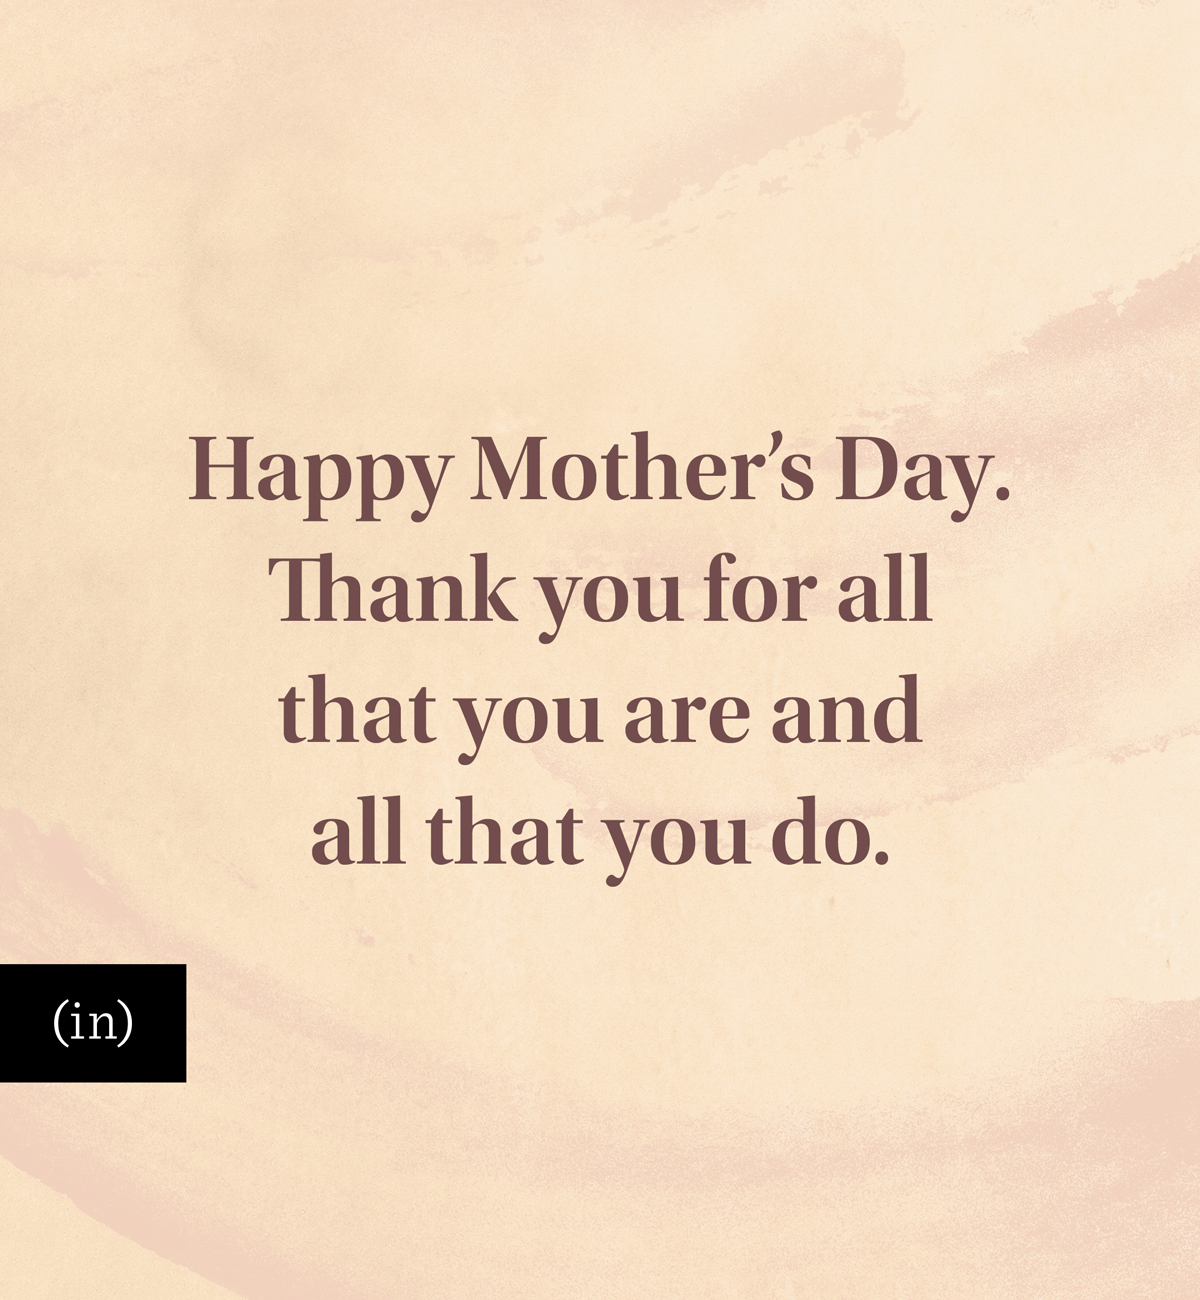 Happy Mother’s Day. Thank you for all that you are and all that you do.